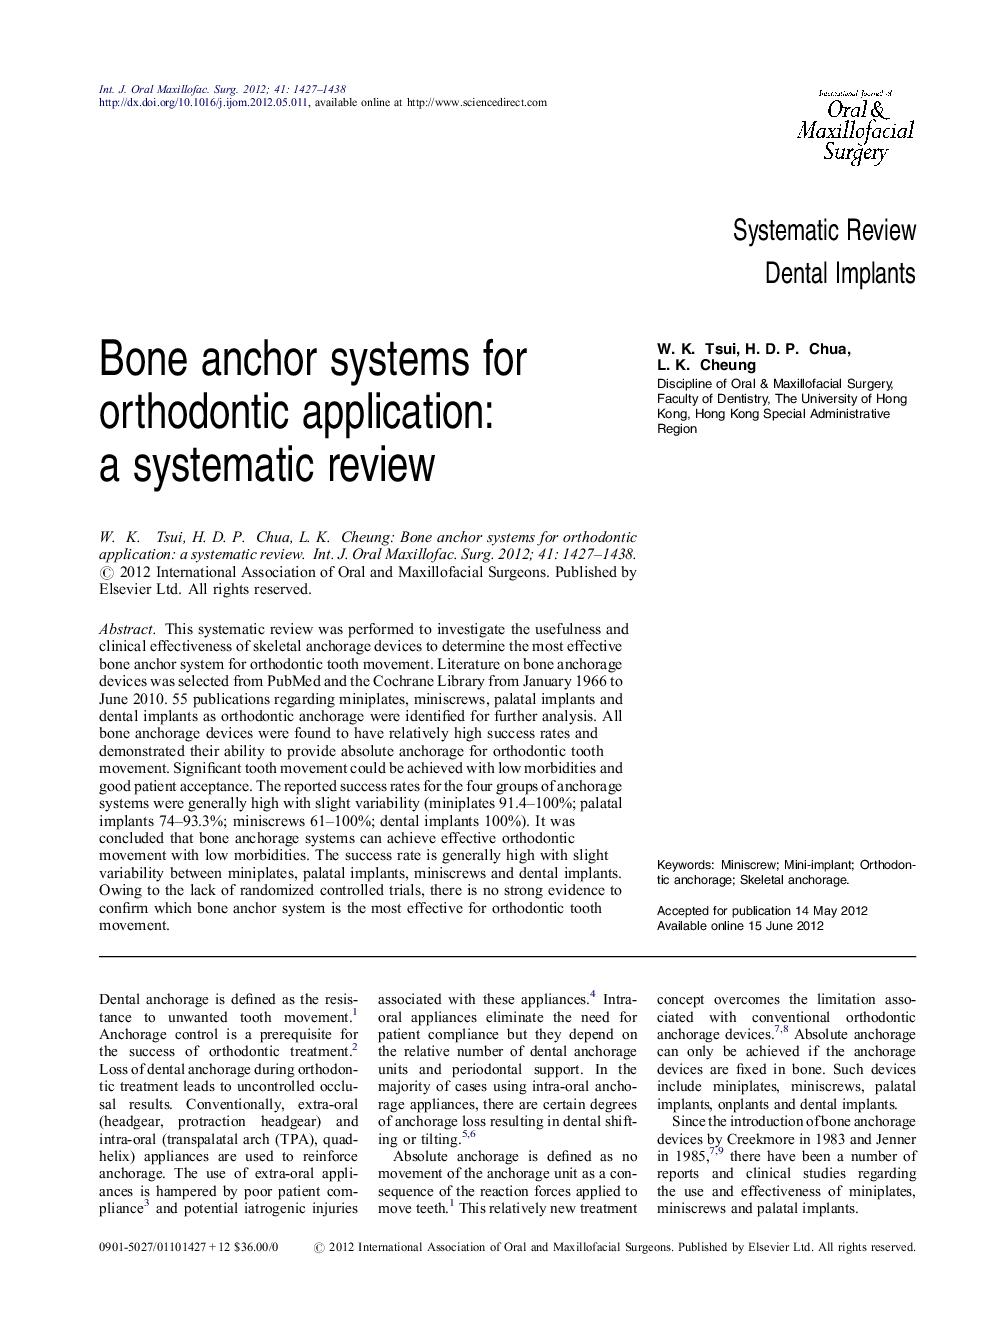 Bone anchor systems for orthodontic application: a systematic review